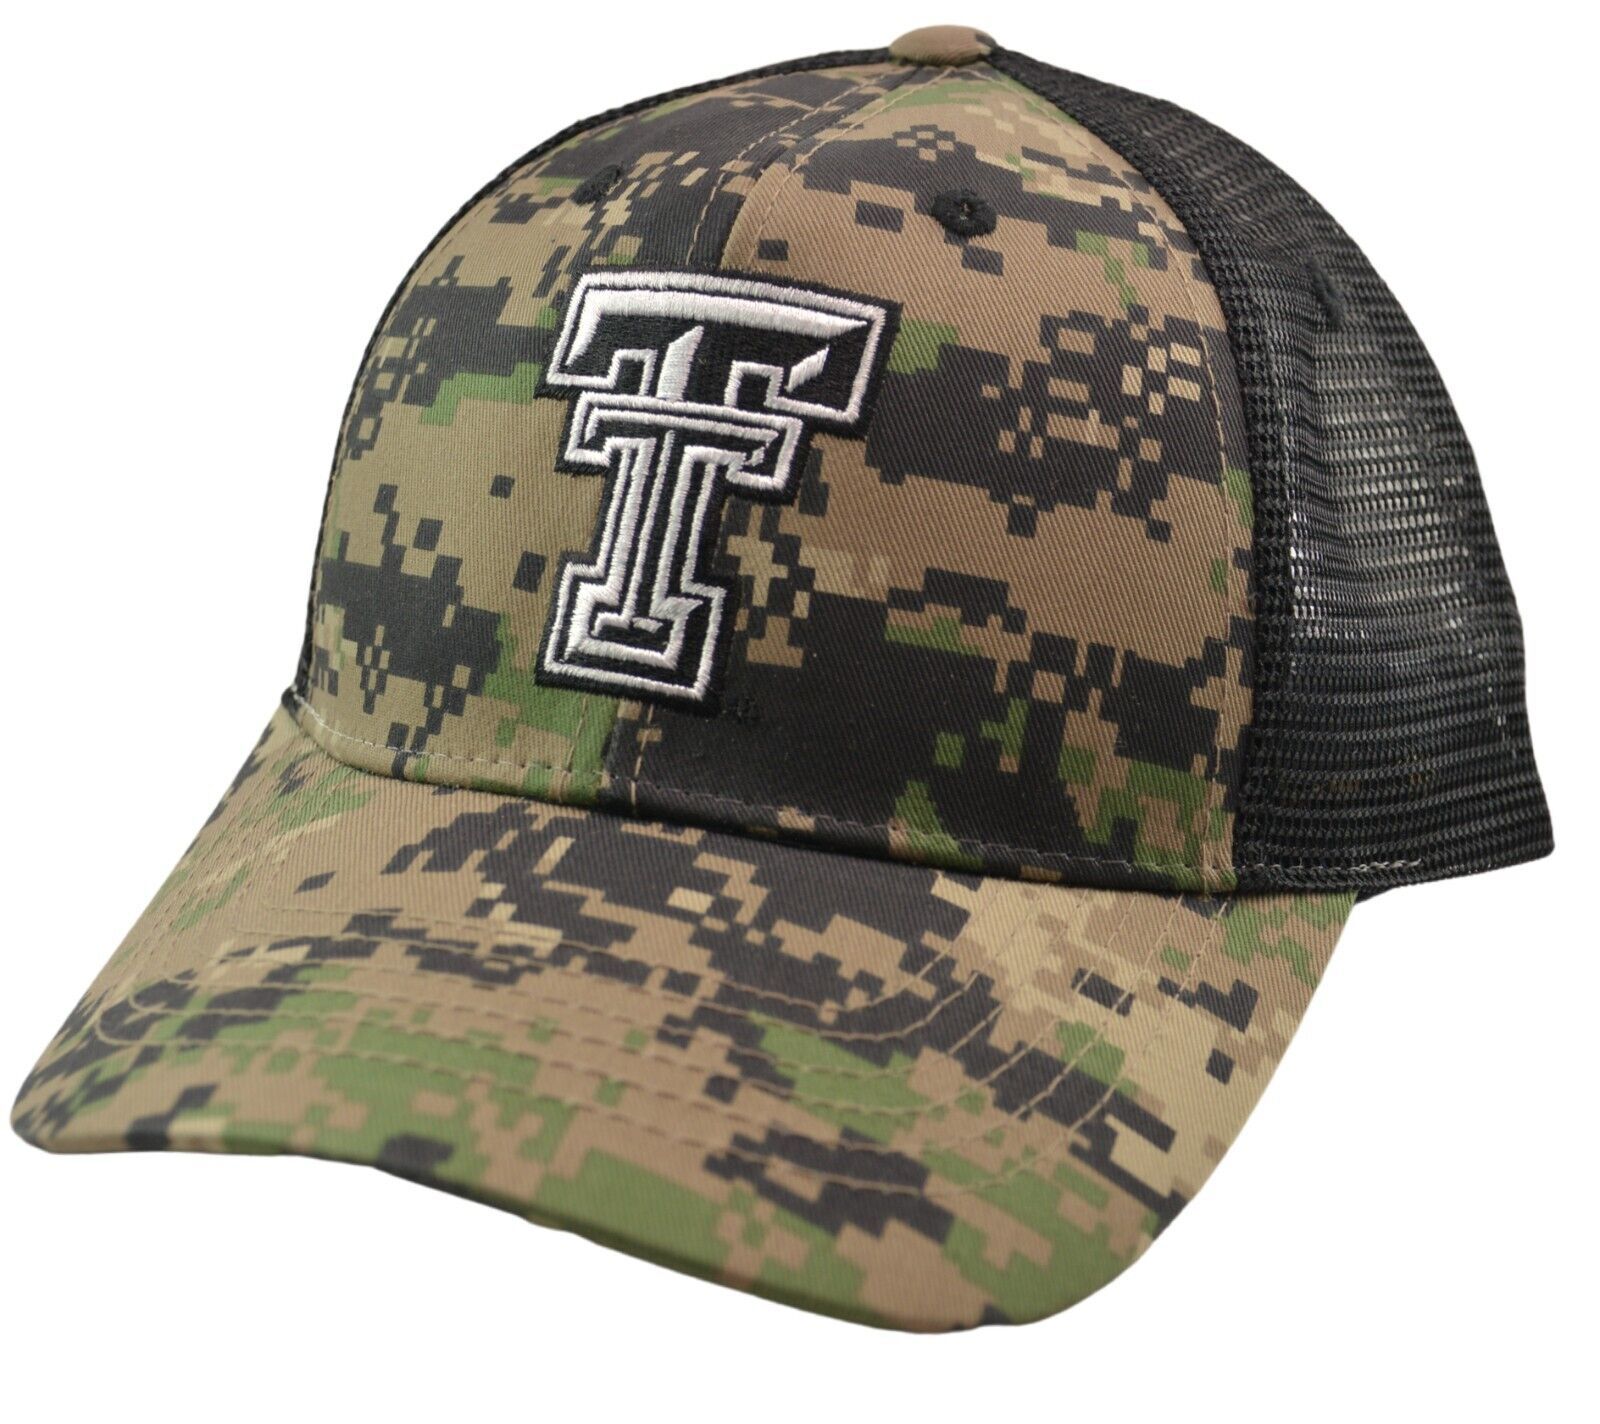 Primary image for Texas Tech Red Raiders NCAA Digital Camo & Black Mesh Back Truckers Hat